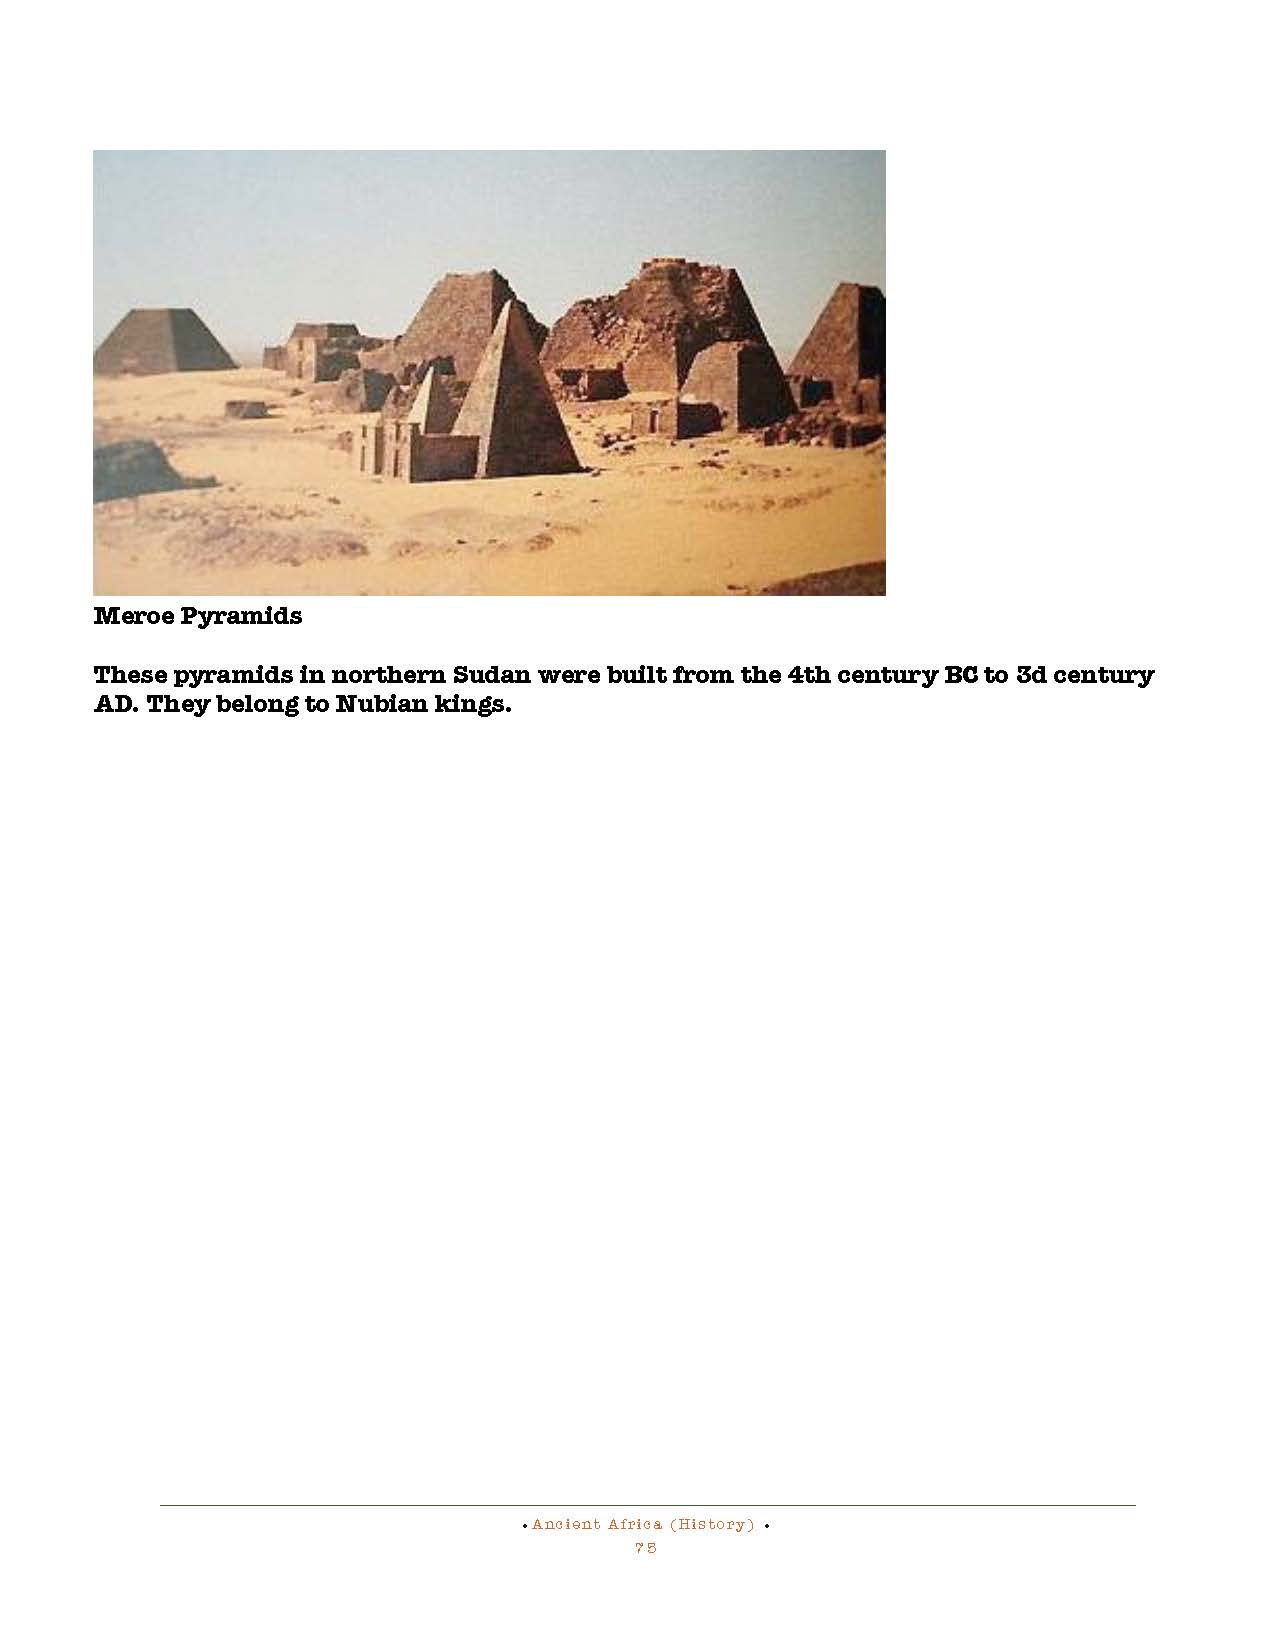 HOCE- Ancient Africa Notes_Page_075.jpg